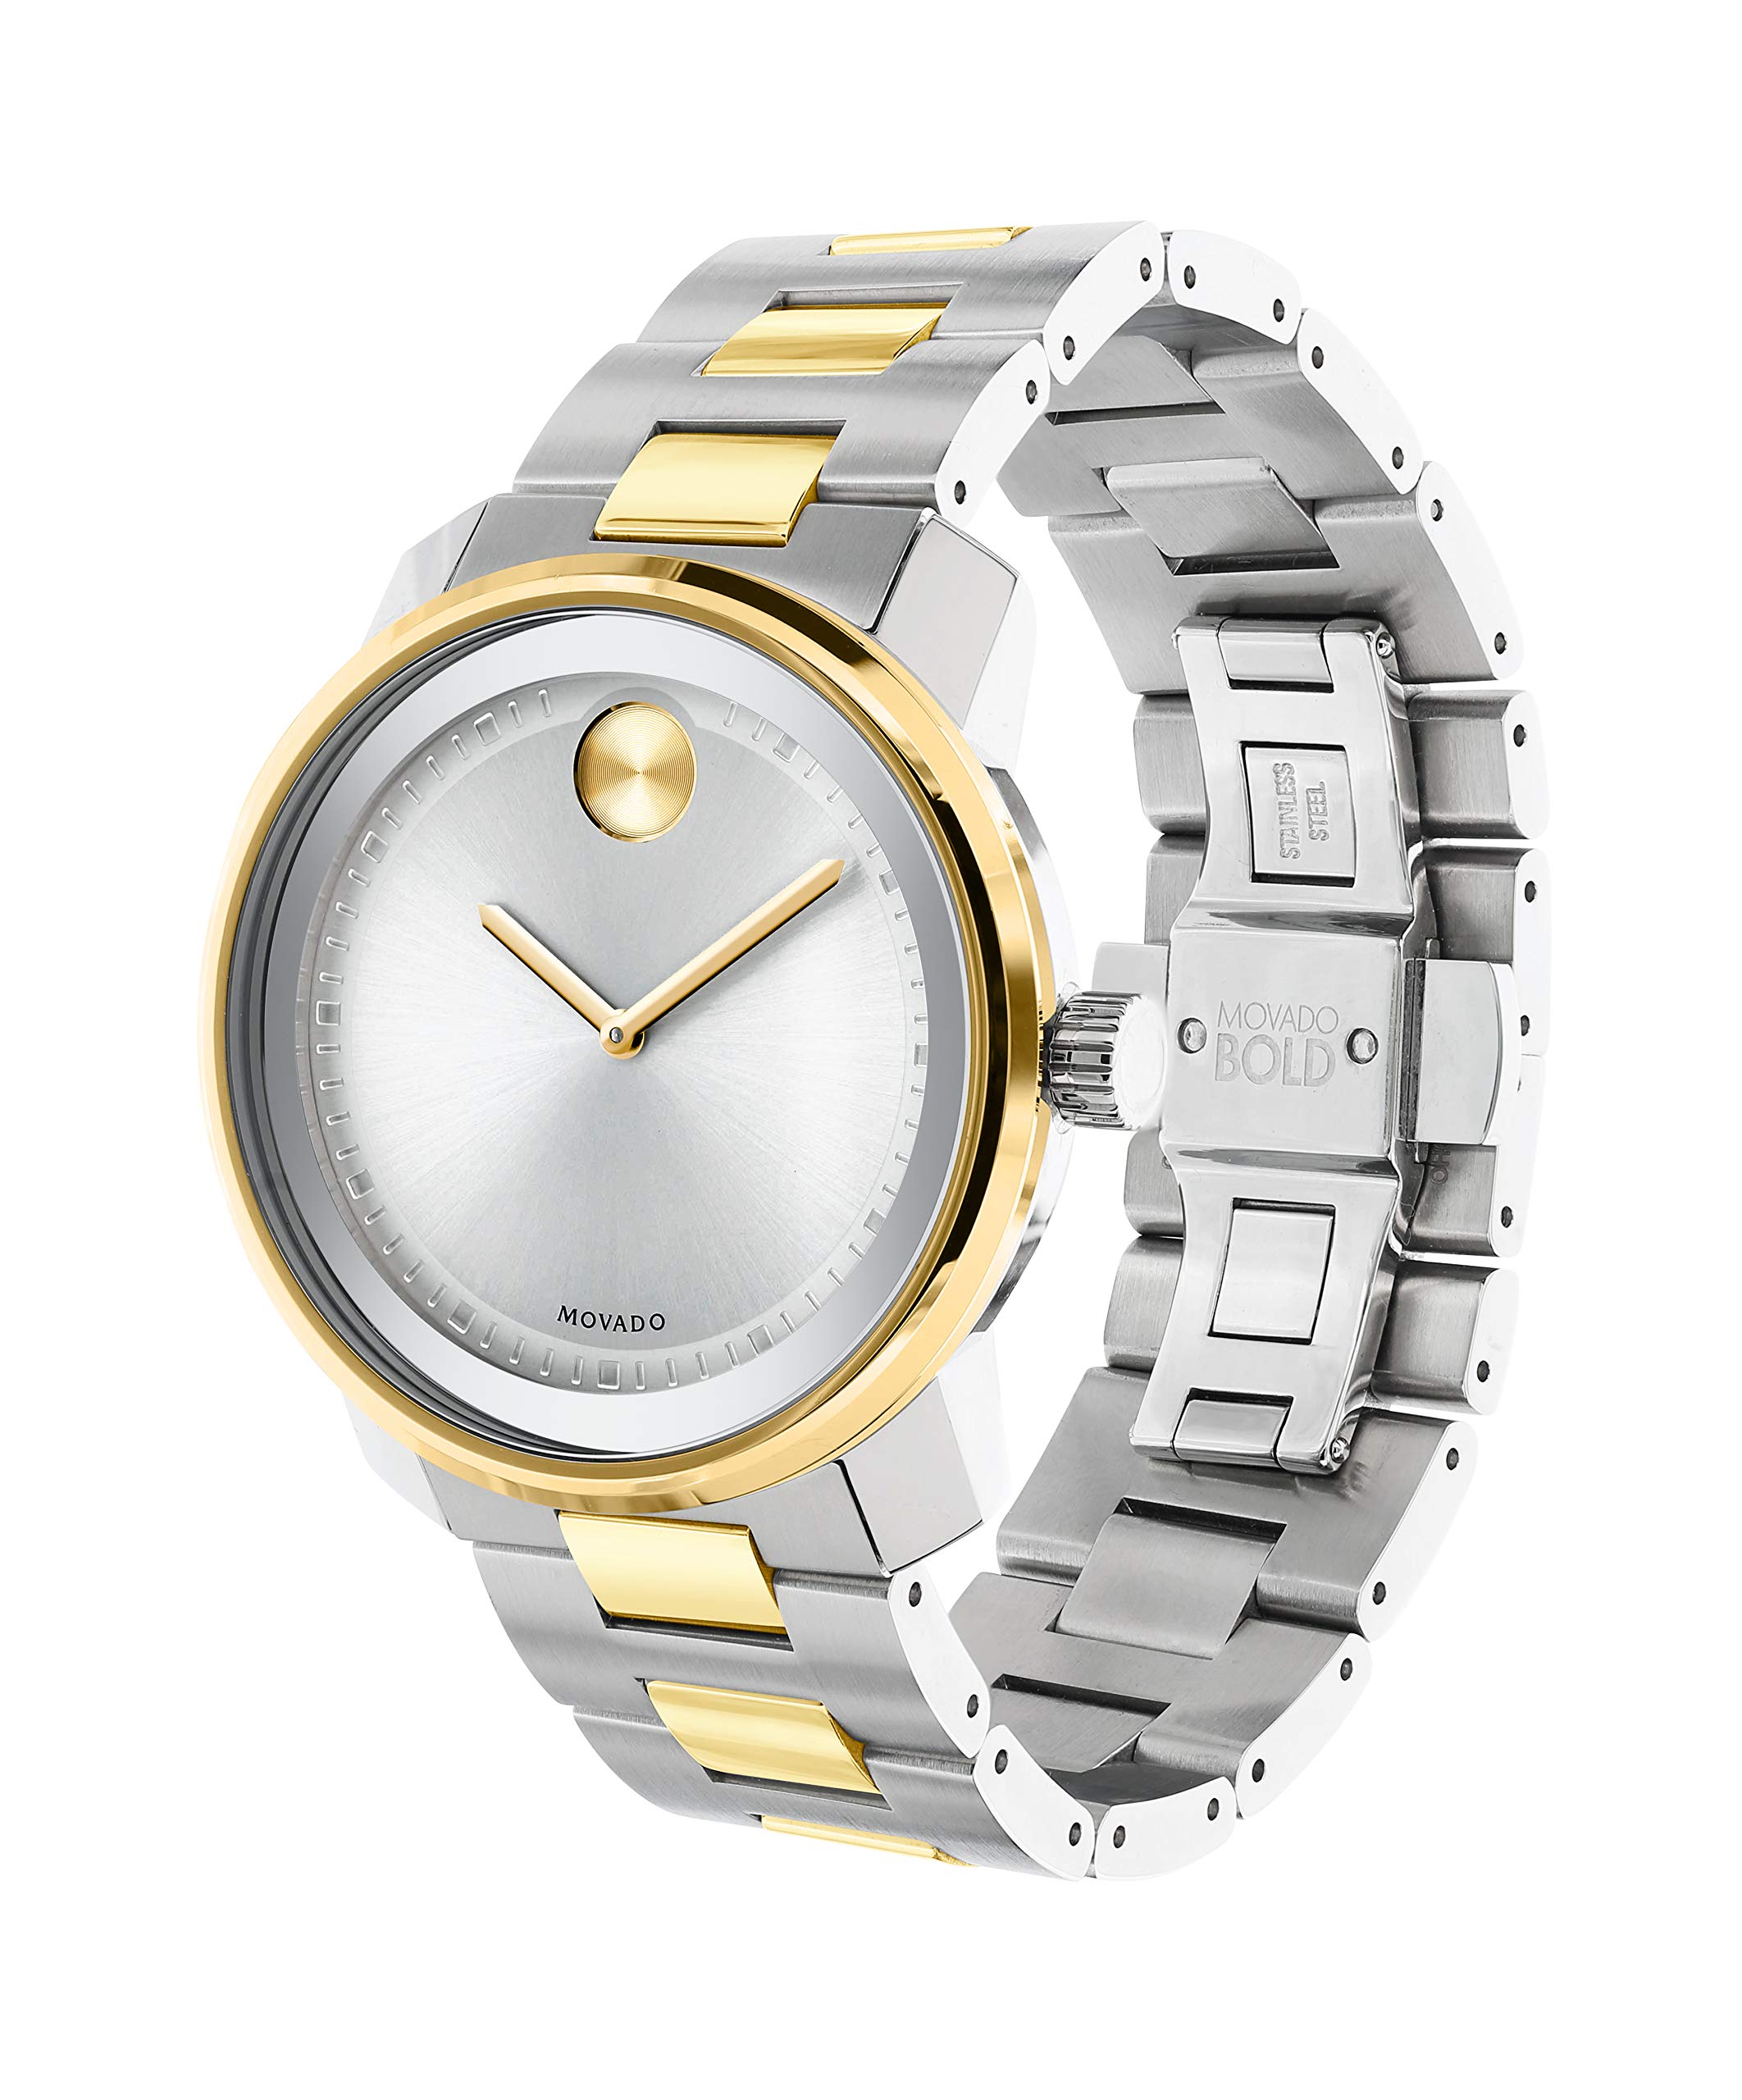 Movado Men's BOLD Metals Two-Tone Watch with a Printed Index Dial, Silver/Grey/Gold (3600431)